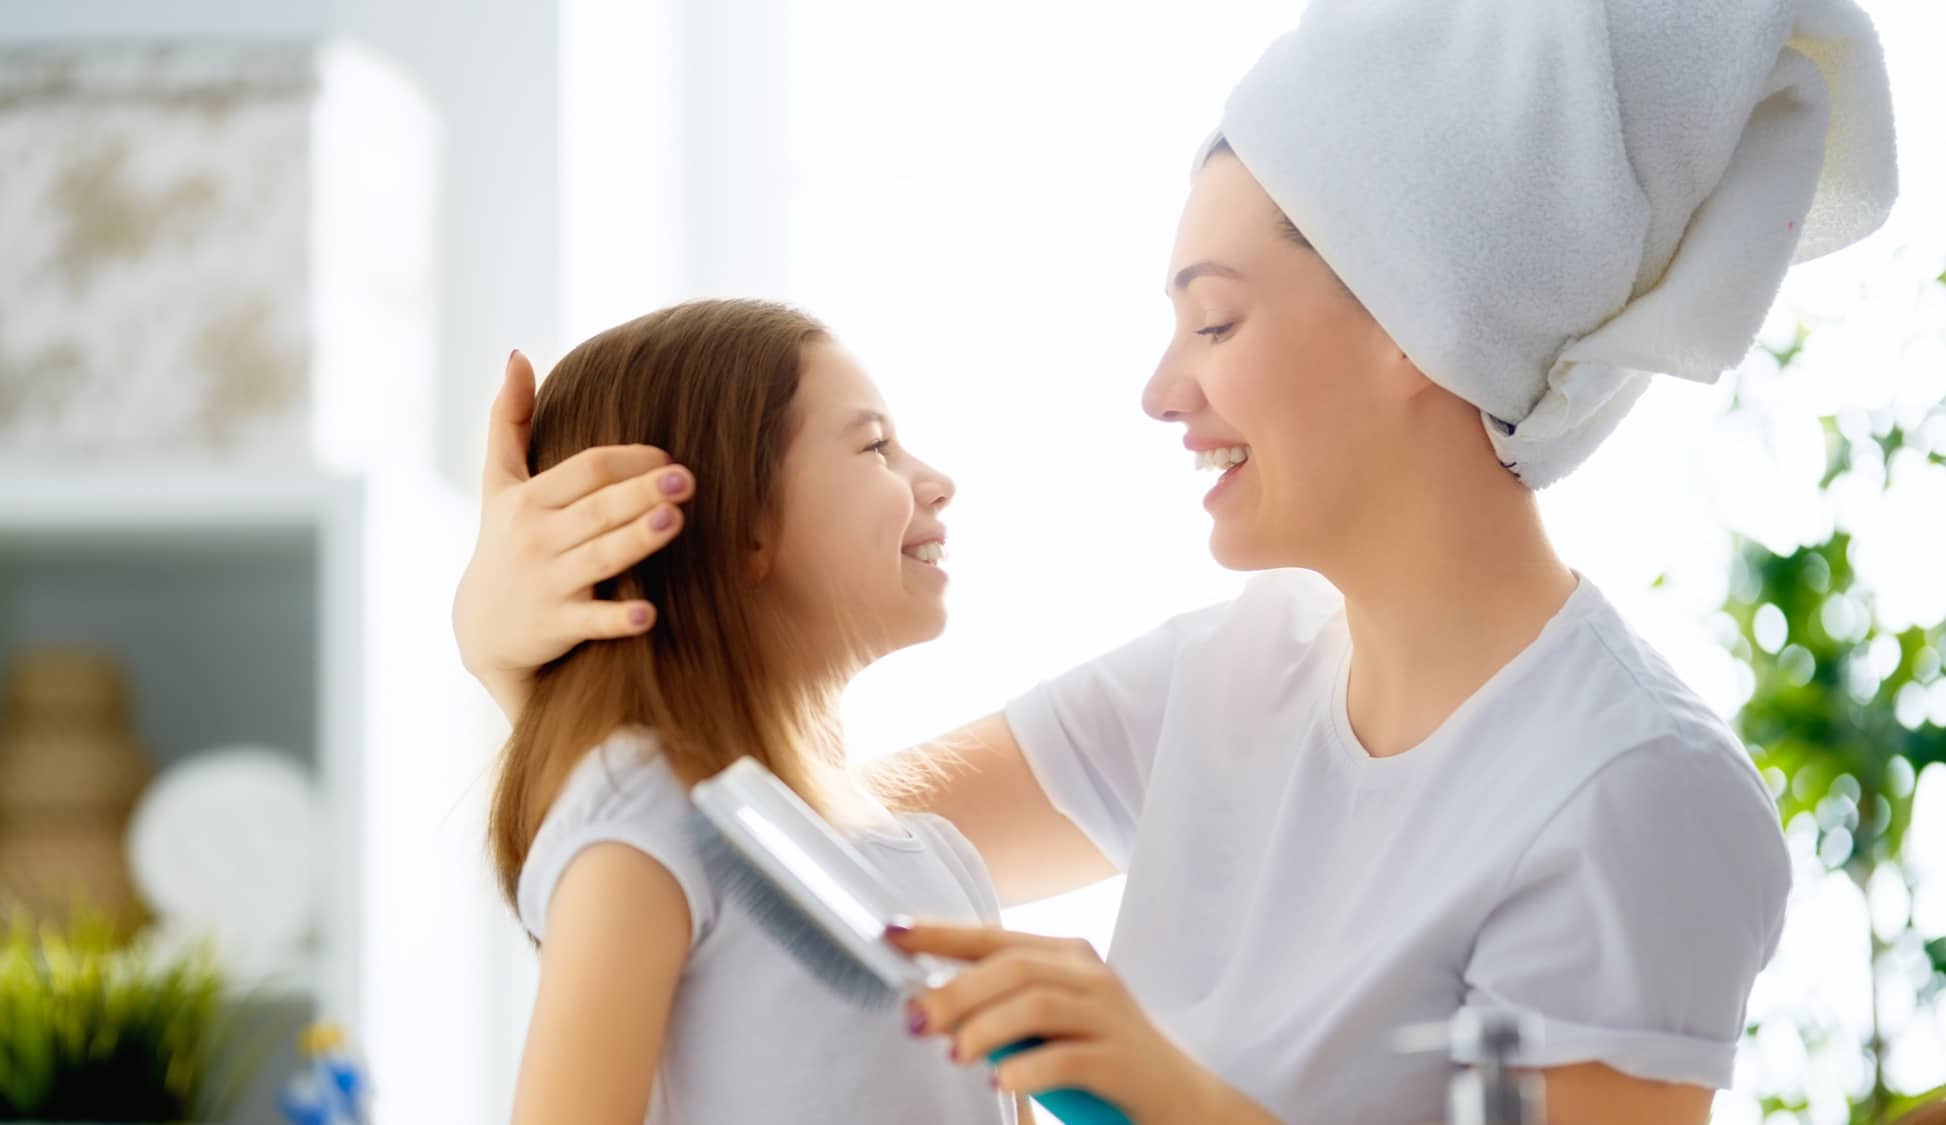 How Do You Keep Lice From Coming Back?